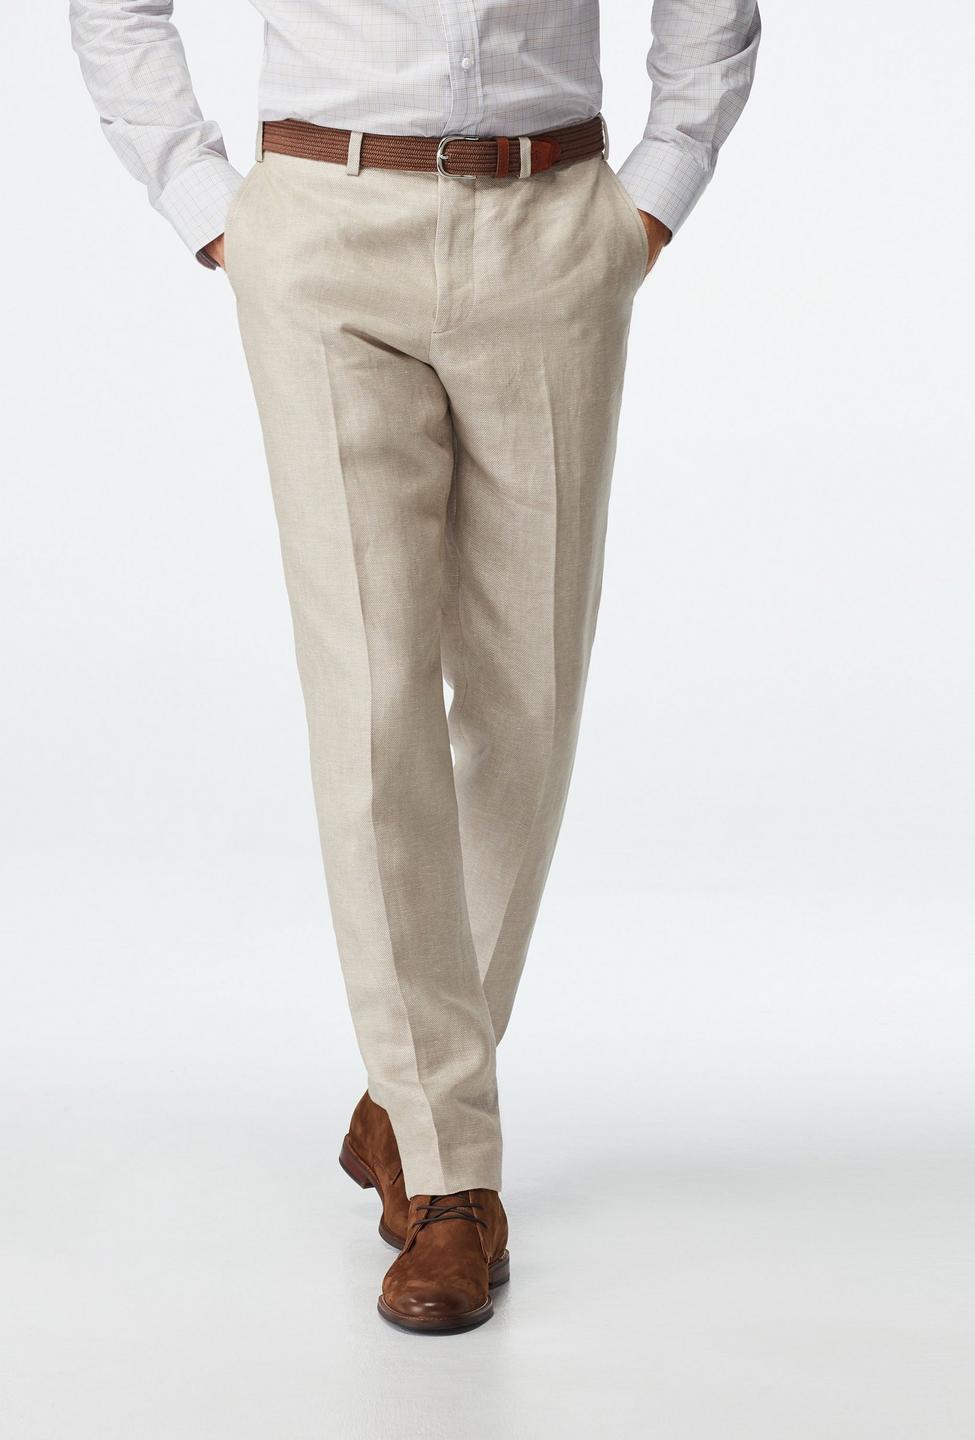 Brown pants - Sailsbury Solid Design from Seasonal Indochino Collection